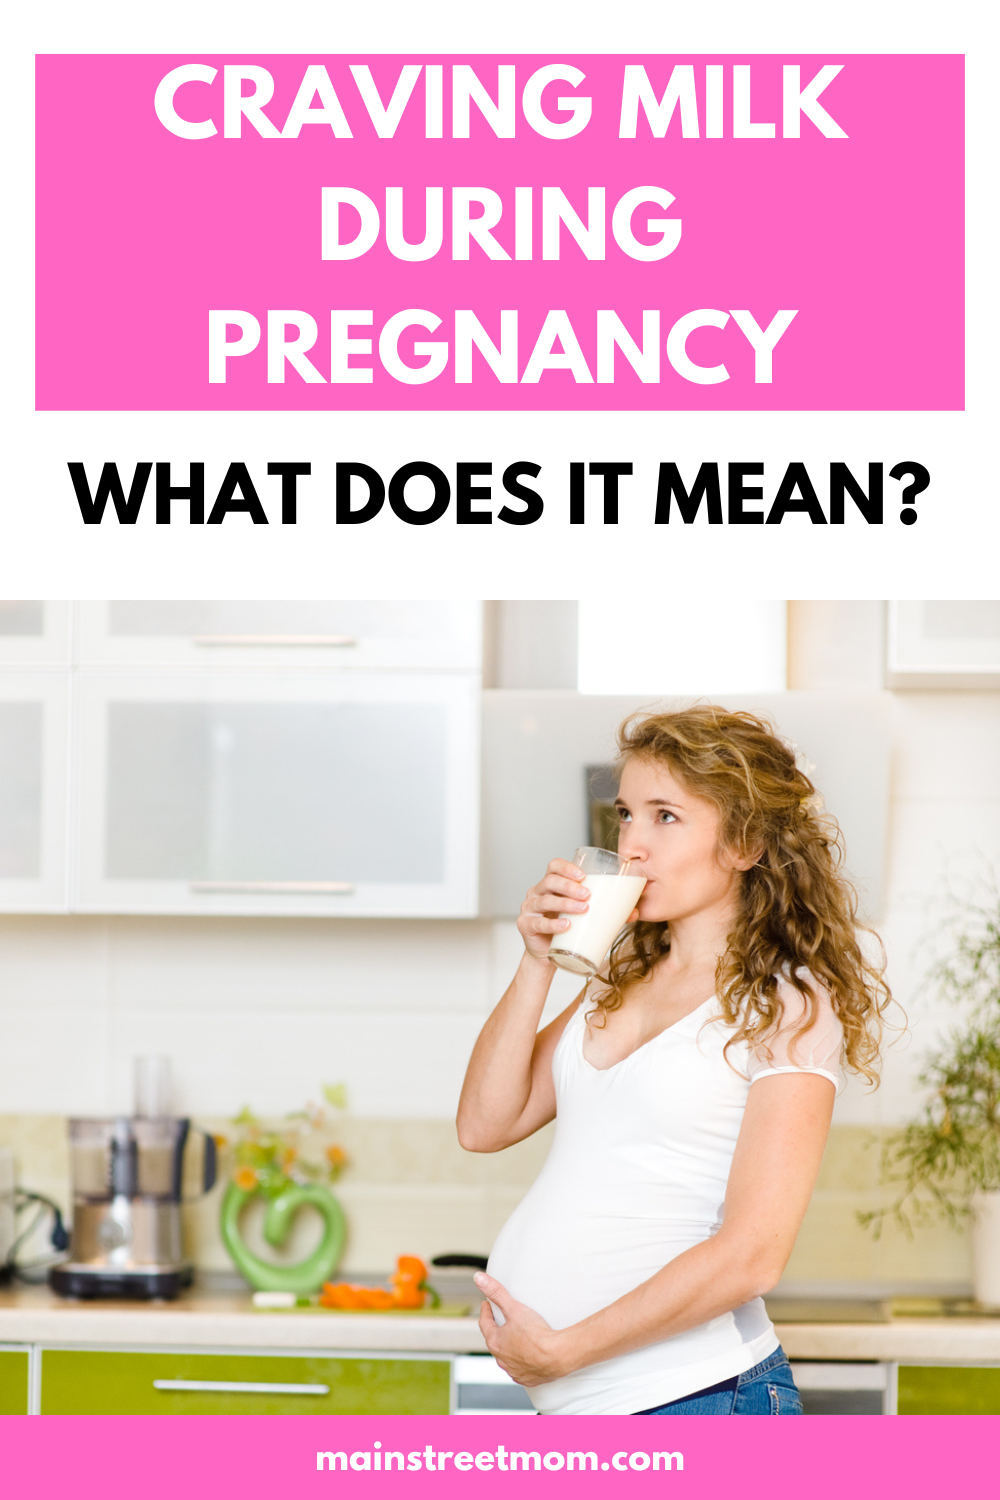 Craving Milk During Pregnancy: What Does It Mean?